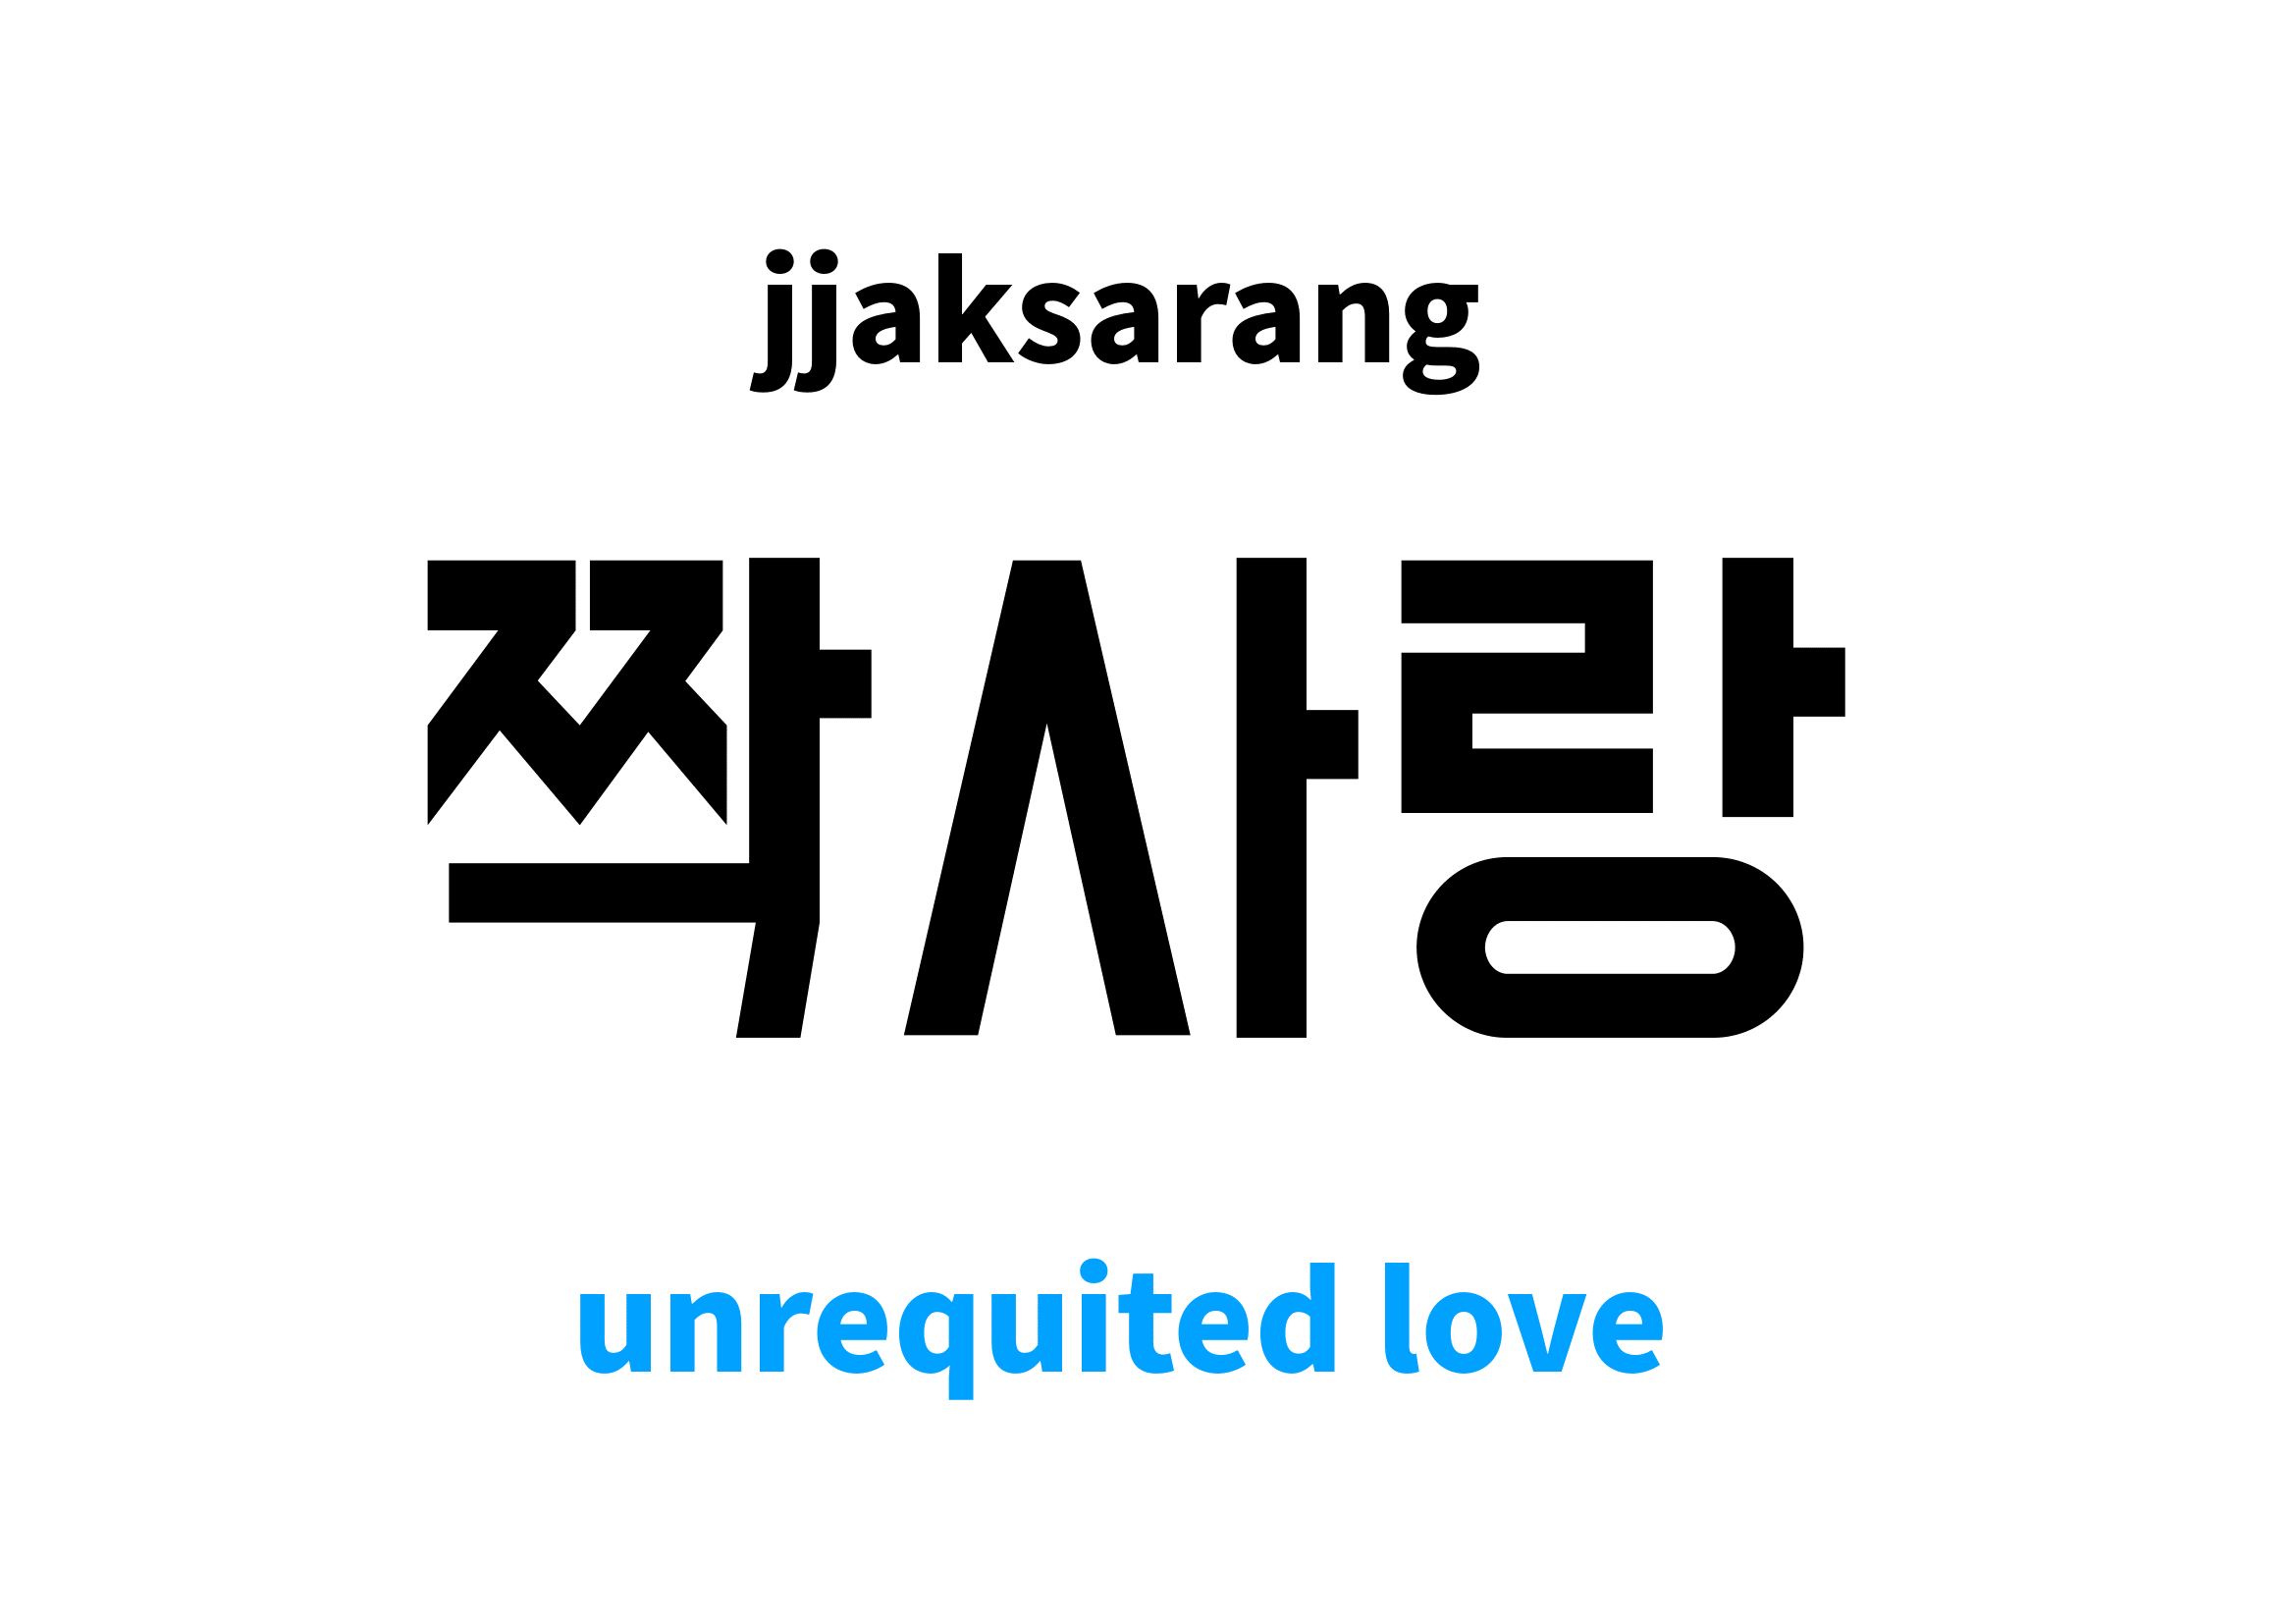 unrequited love in Korean, 짝사랑 meaning